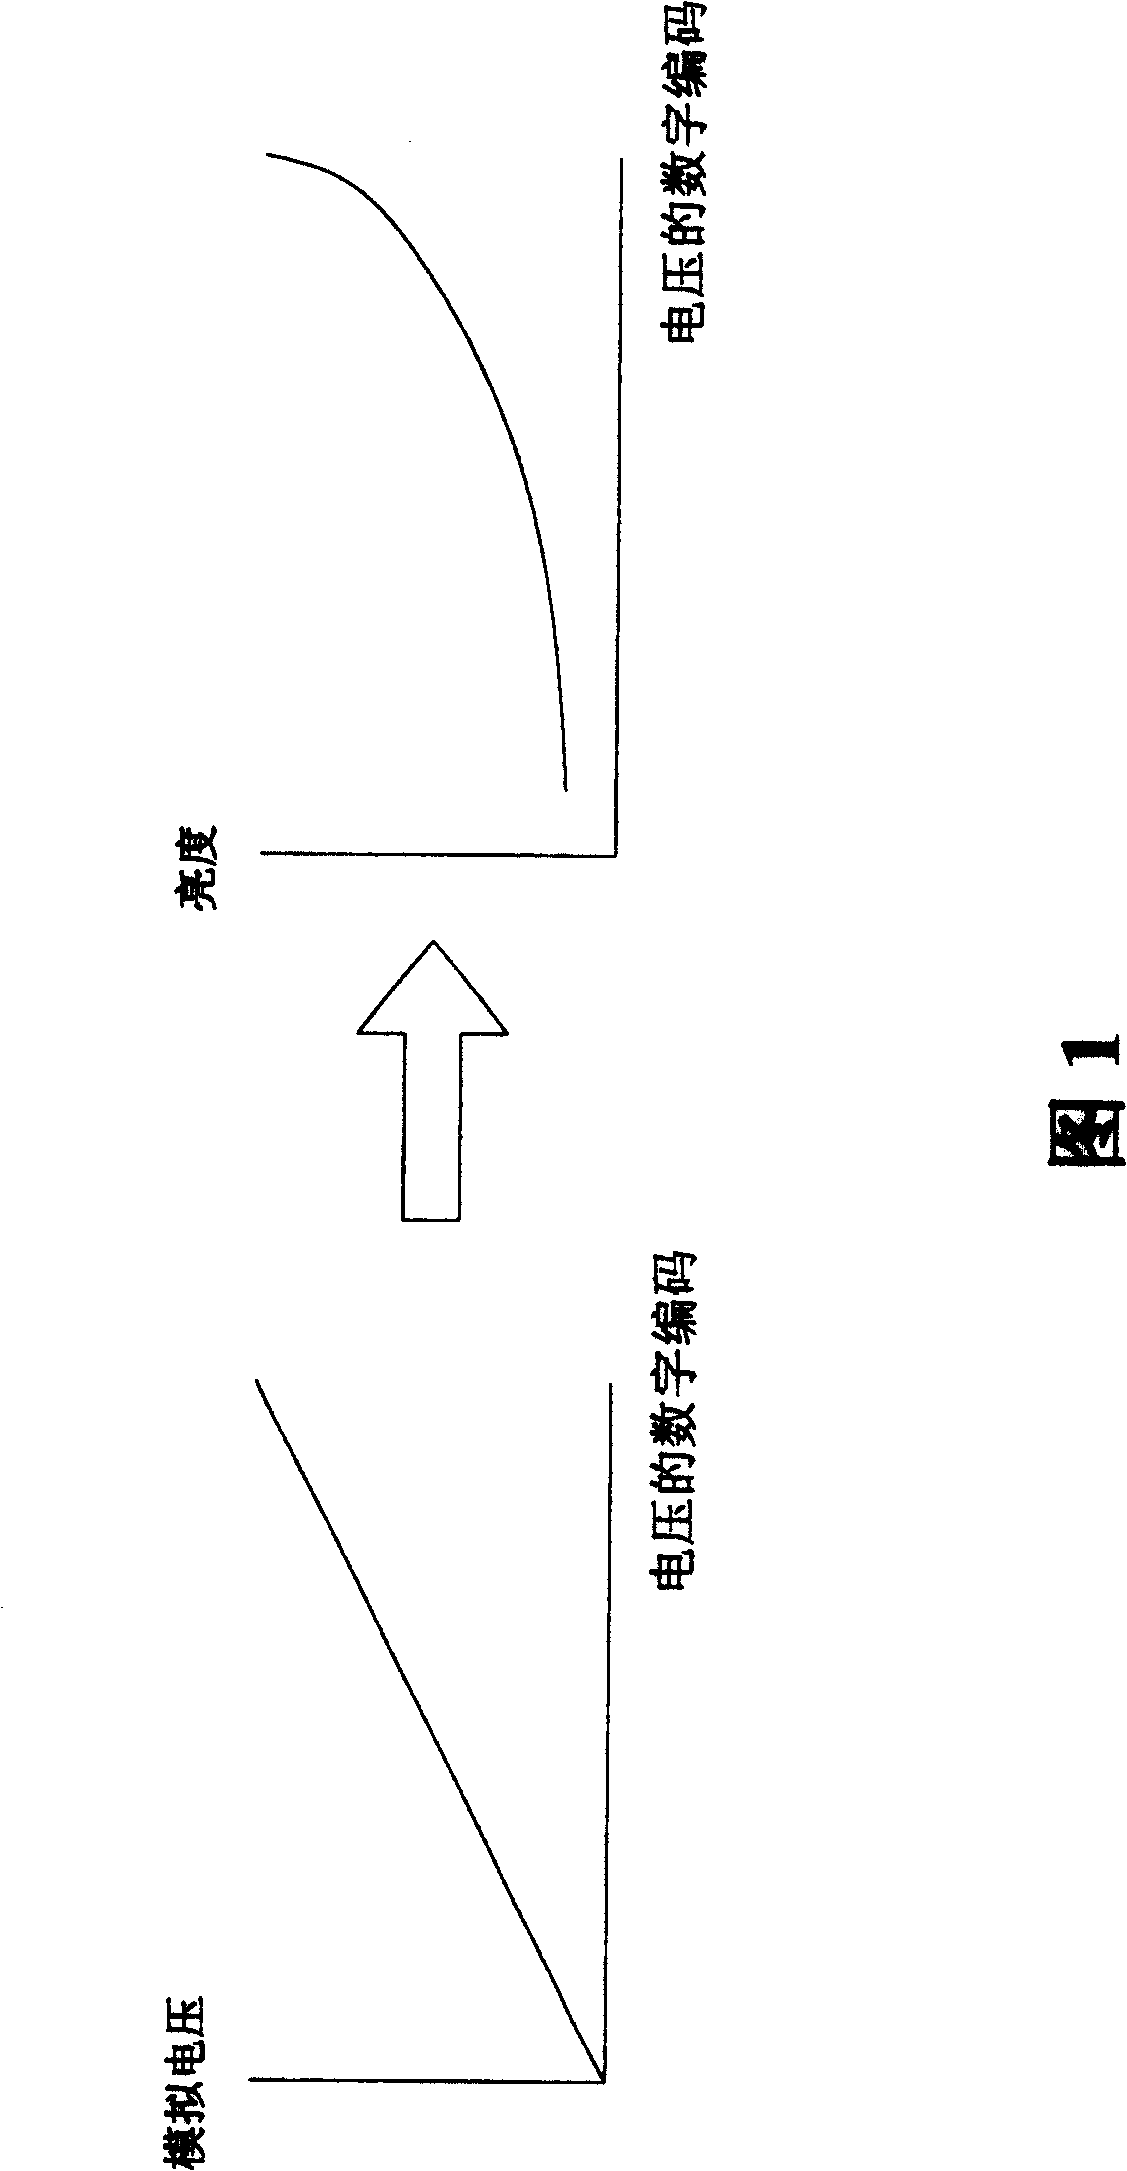 Driving device for resolving display dispersion